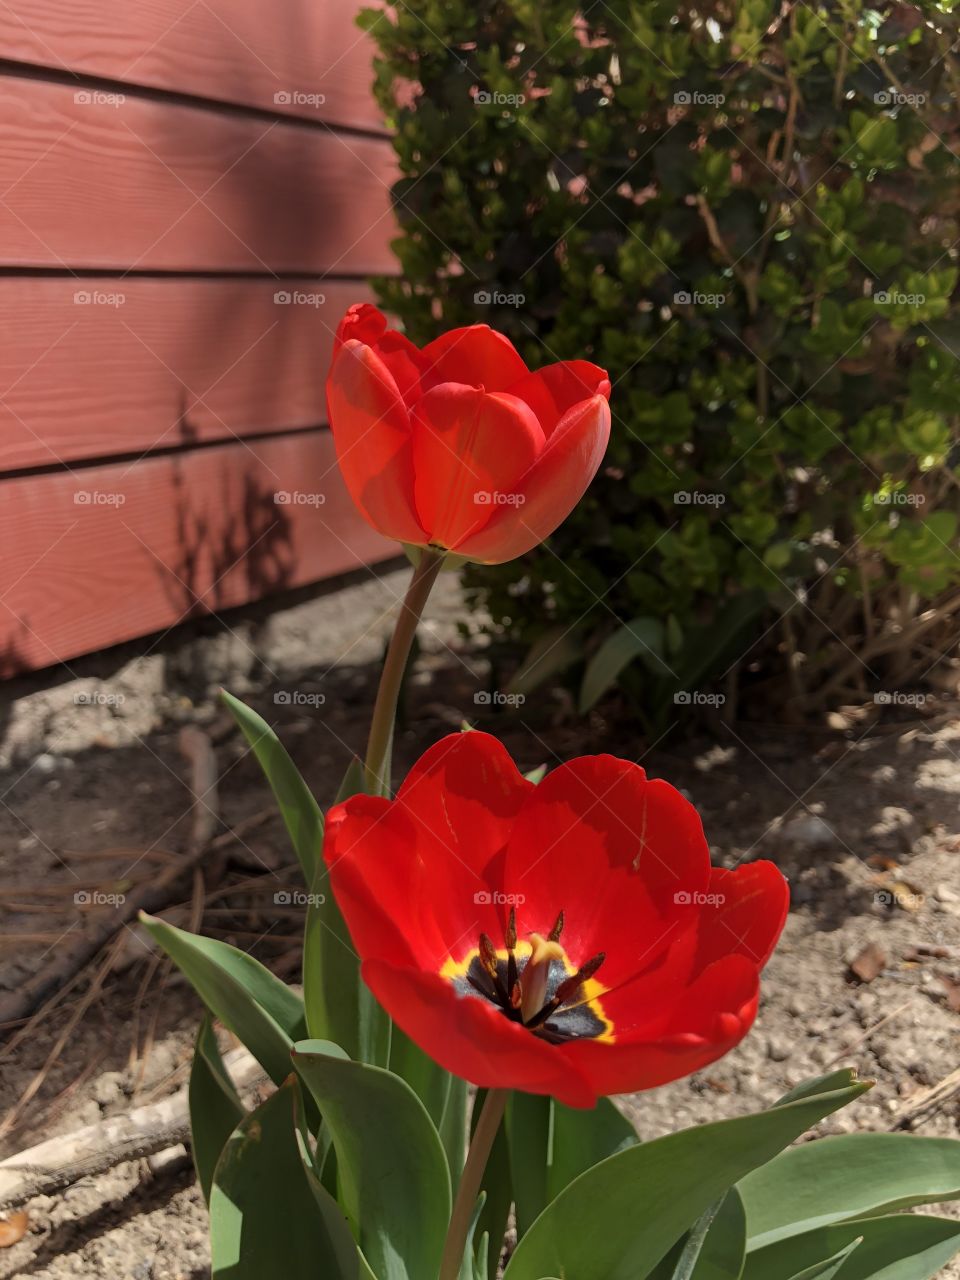 Spring tulips bathing in a late morning sun opening their red petals to the warmth inviting in a new season of life.